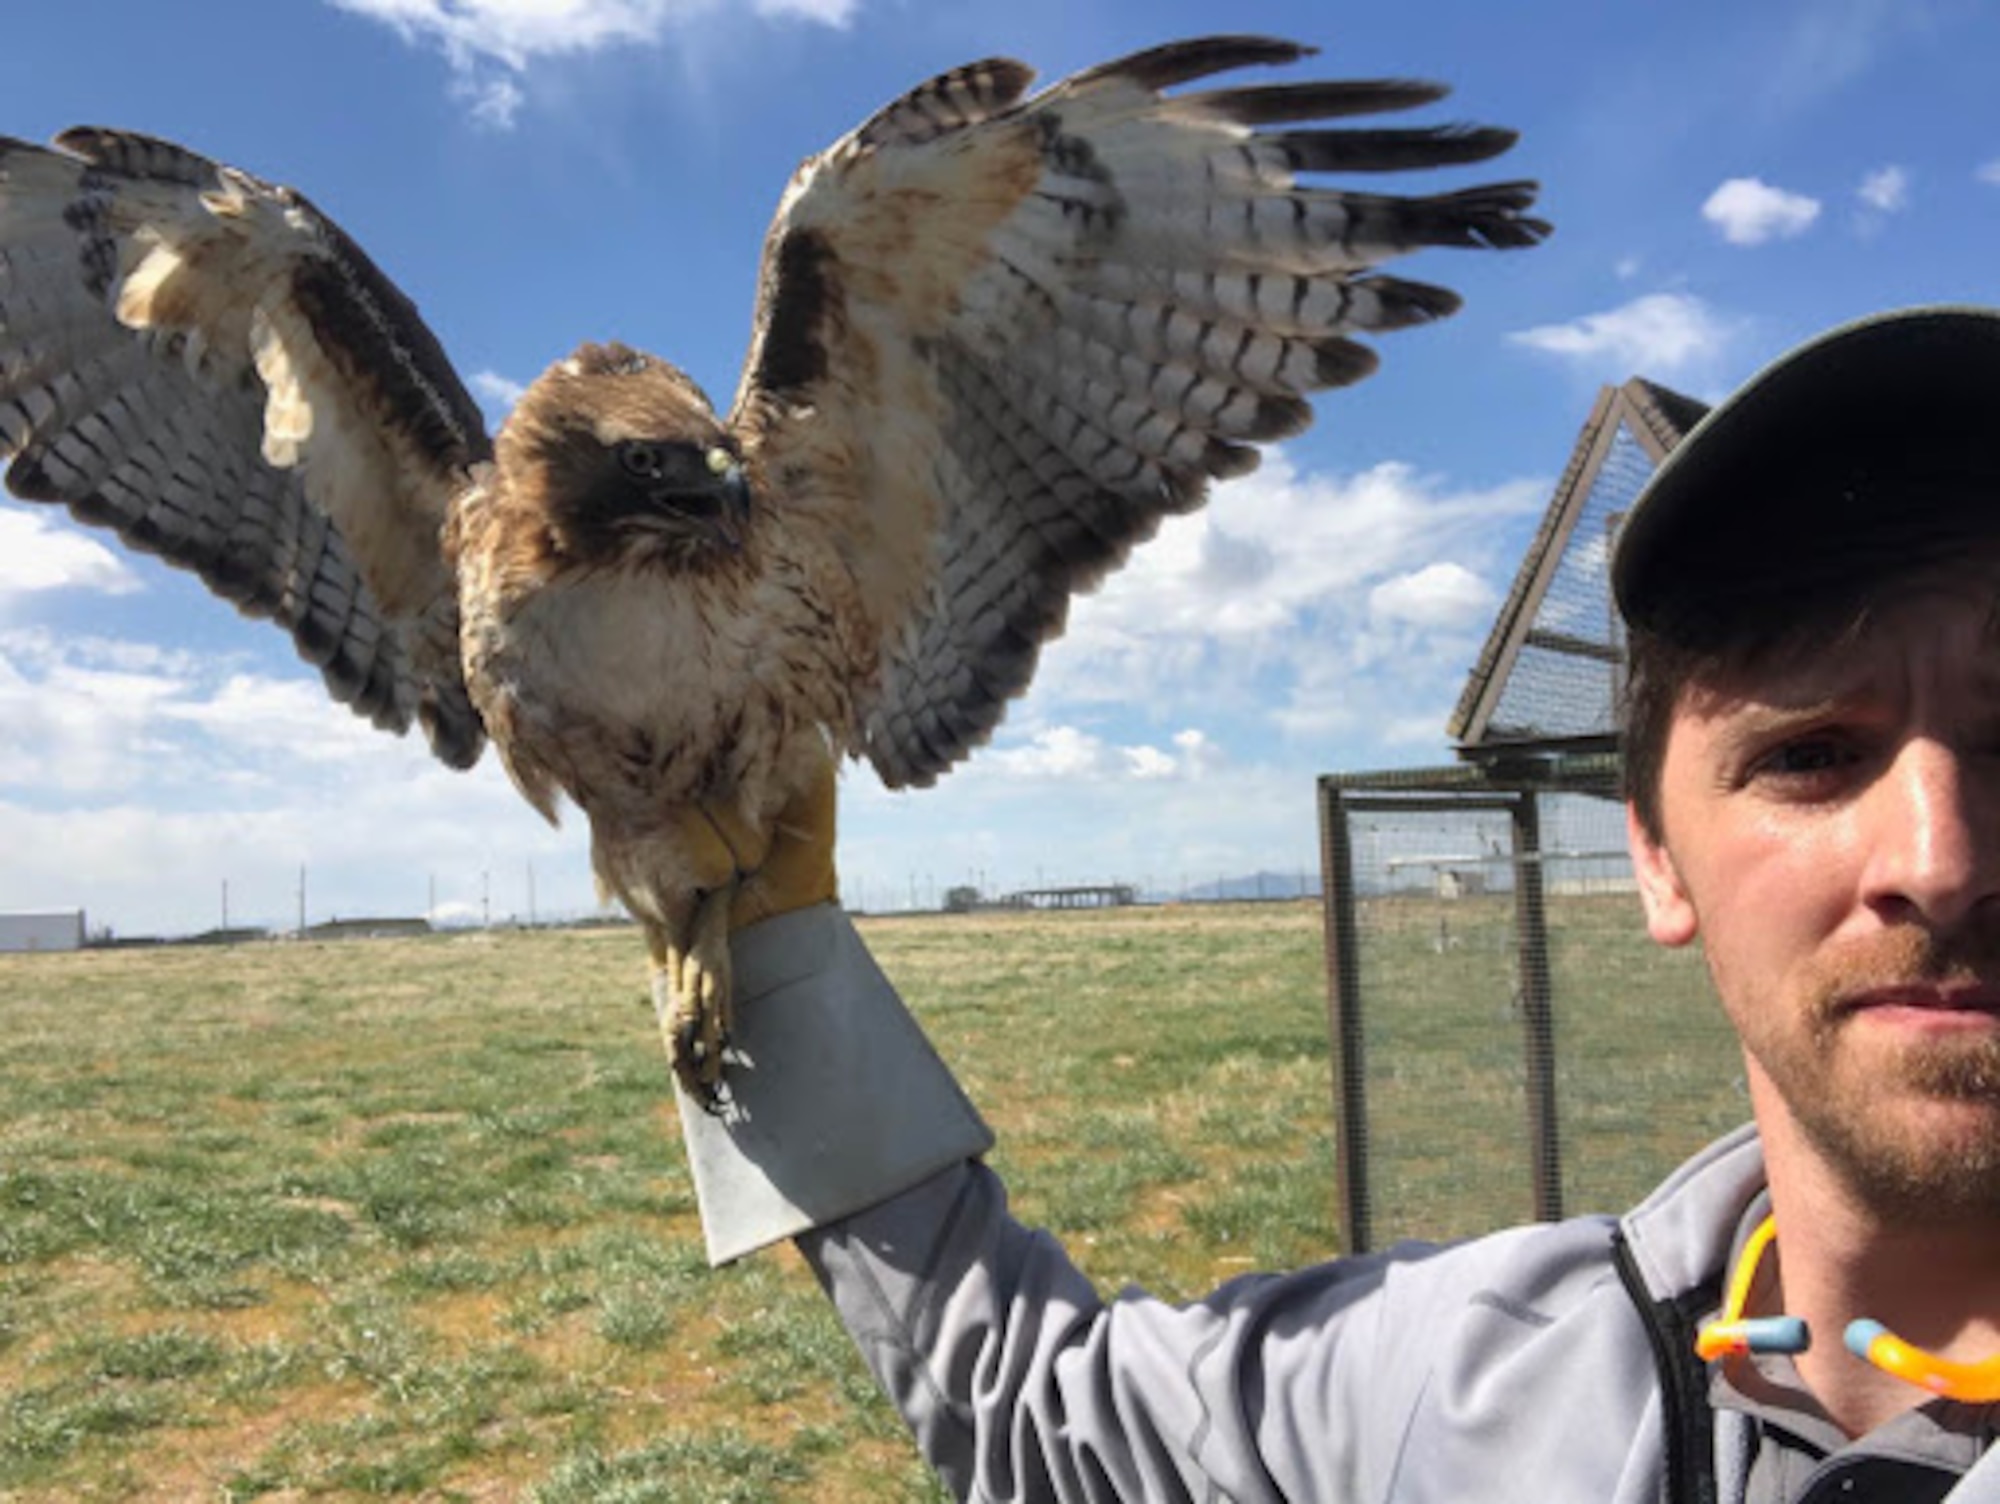 Tyler Adams, a US Department of Agriculture wildlife biologist at Hill Air Force Base, Utah, displays a red-tailed hawk captured near the base's flight line. The bird will be taken to a new habitat as part of the Raptor Relocation Program, which focuses on trapping kestrels, hawks, owls, and other raptors and relocating the birds to safer and more suitable habitats away from the airfield. (Courtesy photo)